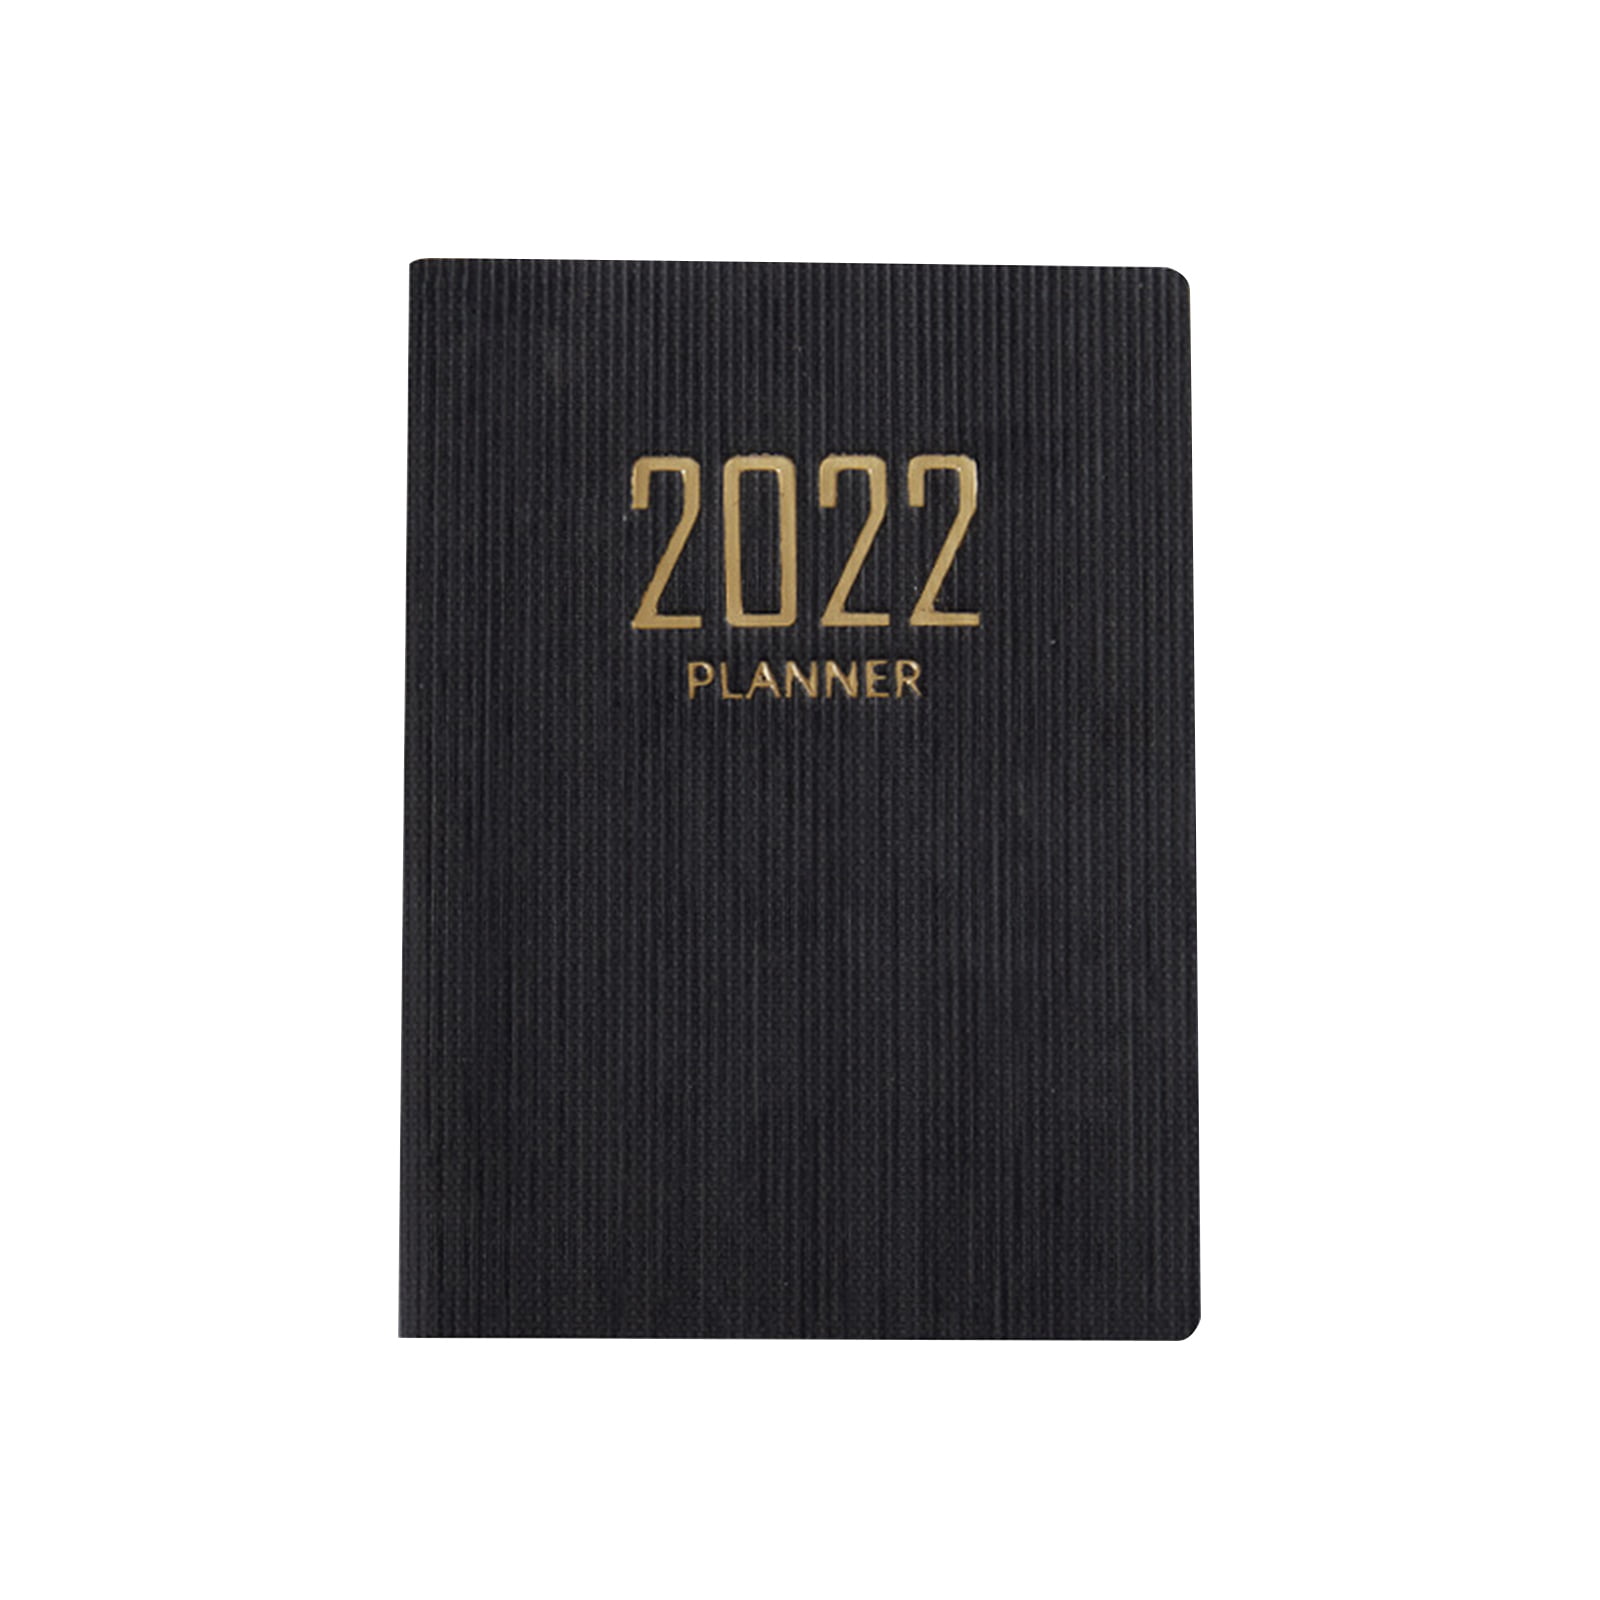 2022 Appointment Book Planner Daily Hourly Weekly Calendar Notes Black Organizer 